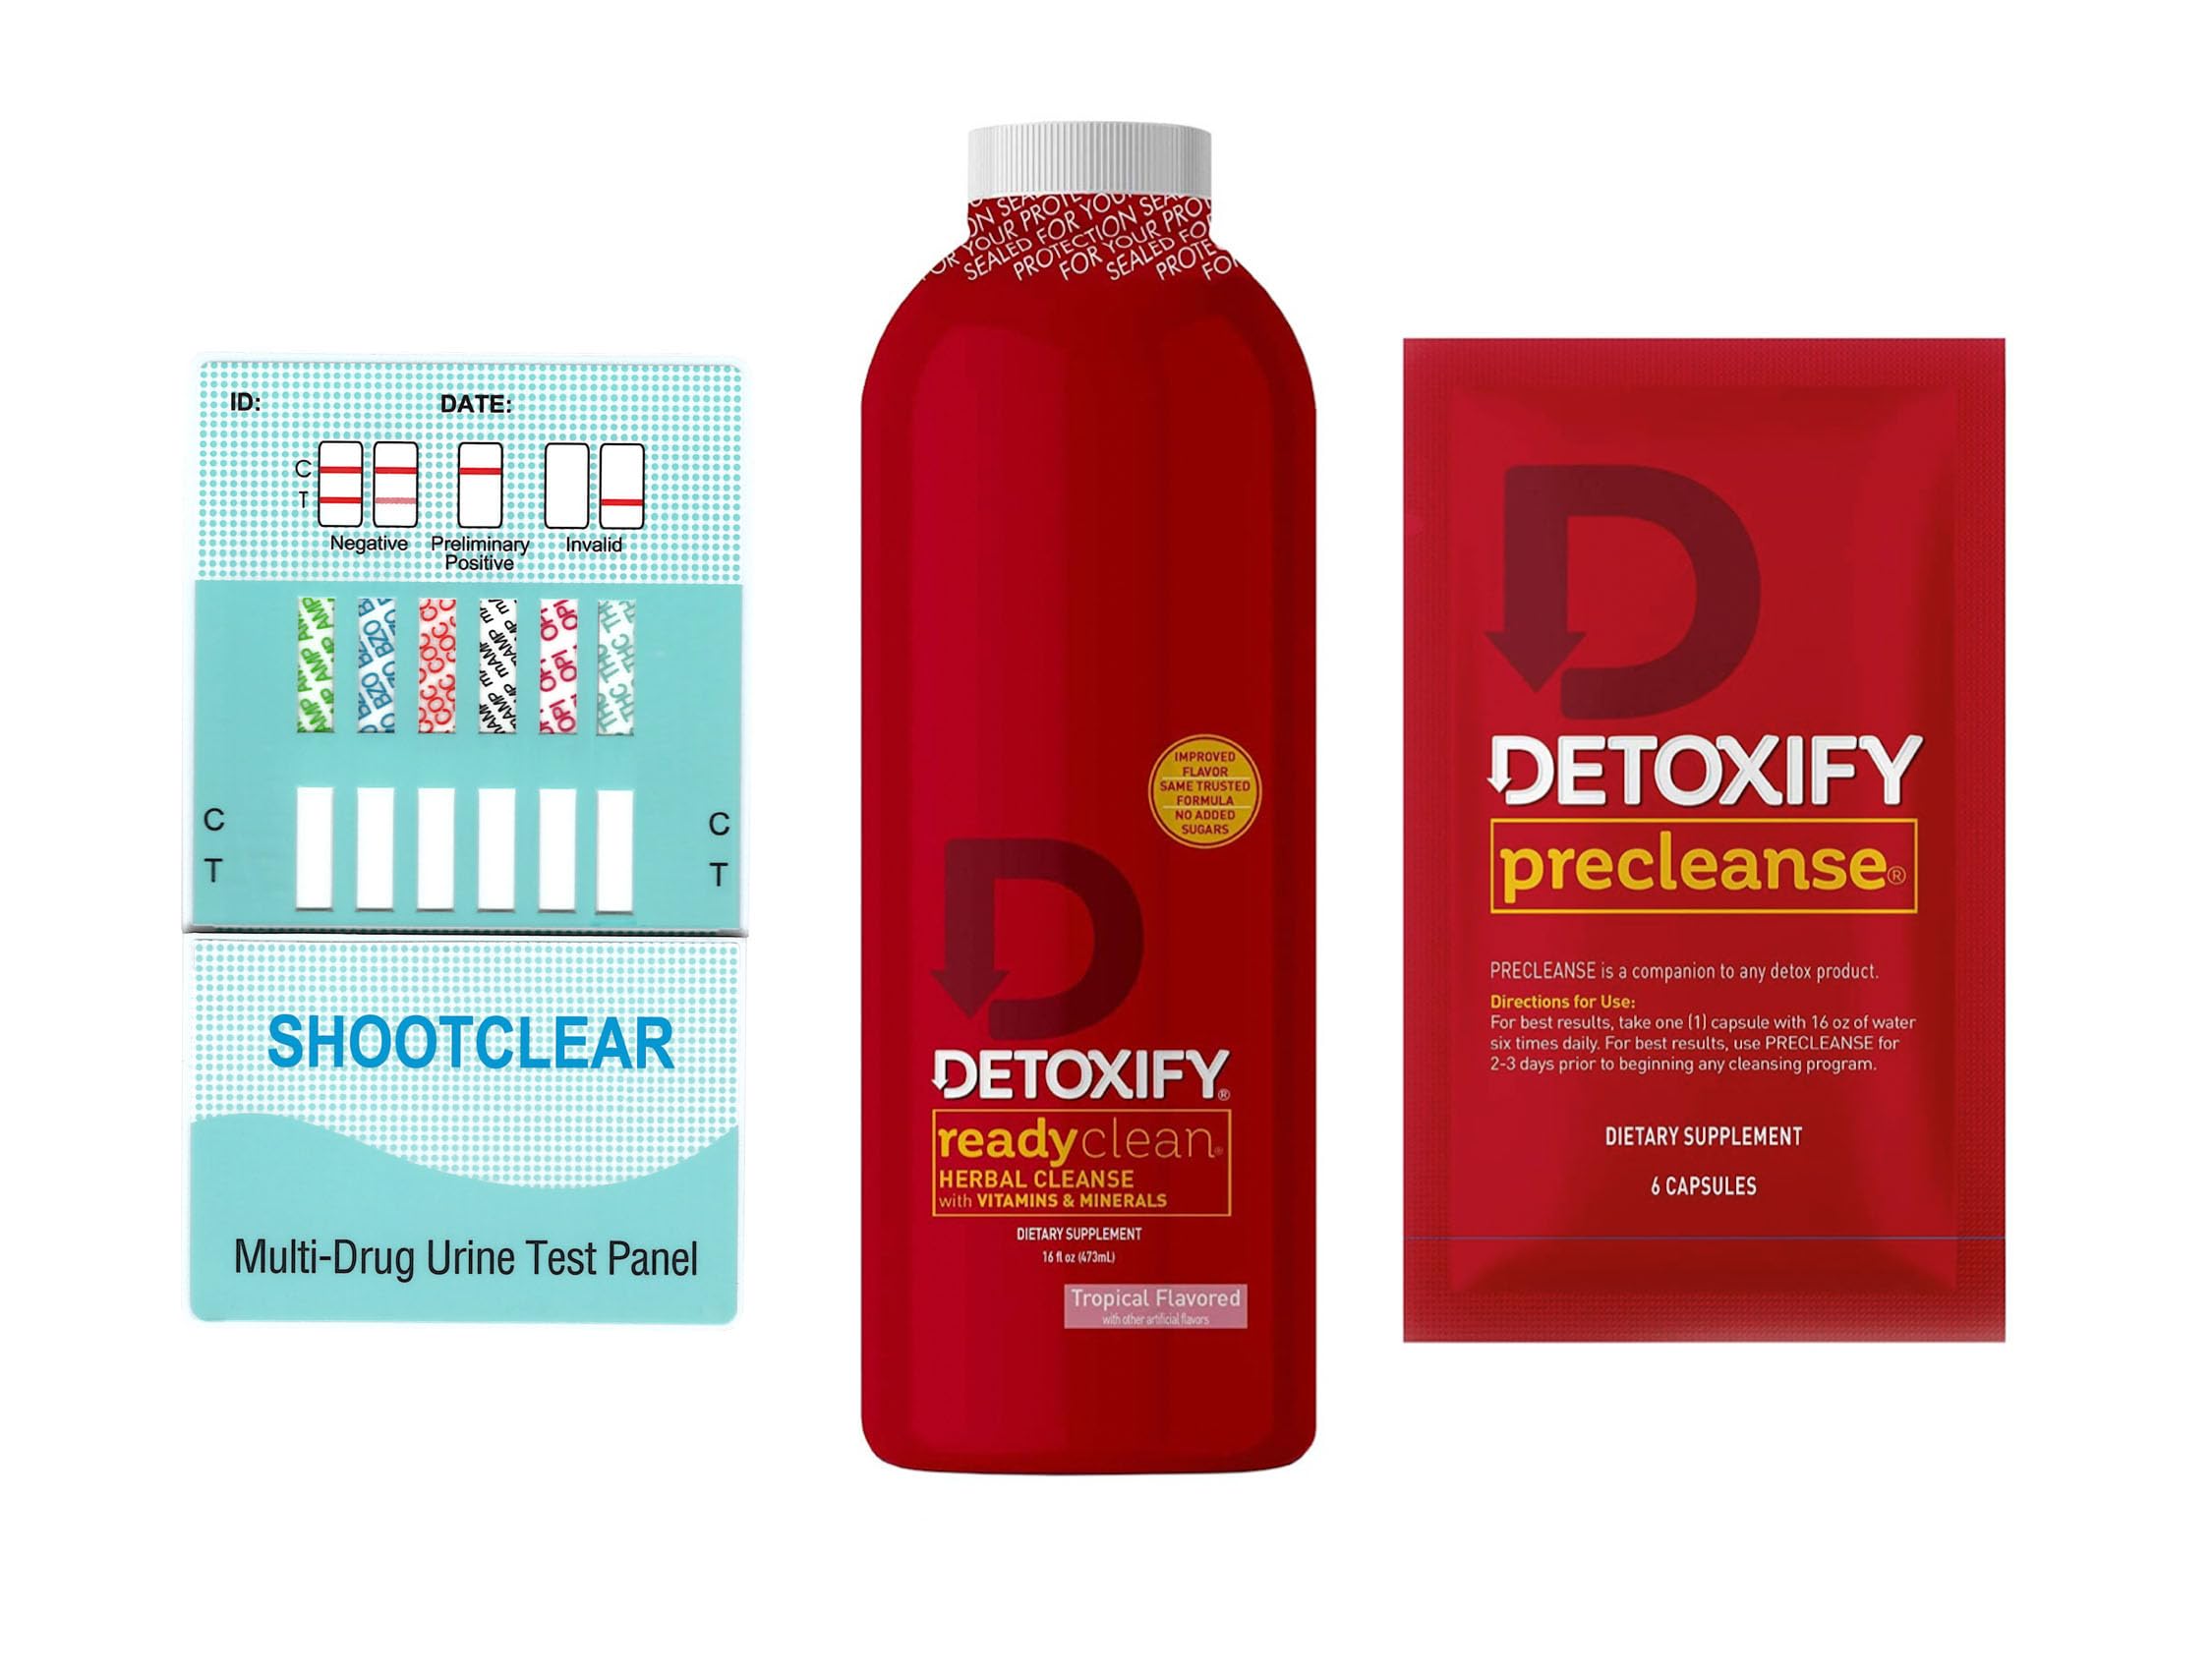 Detoxify Ready Clean Detox Drink, Herbal Precleanse Pills, 6 Panel Test, Detox and Quick Flush of Your Body-Fast Professional Formulated 1 HR Cleanse